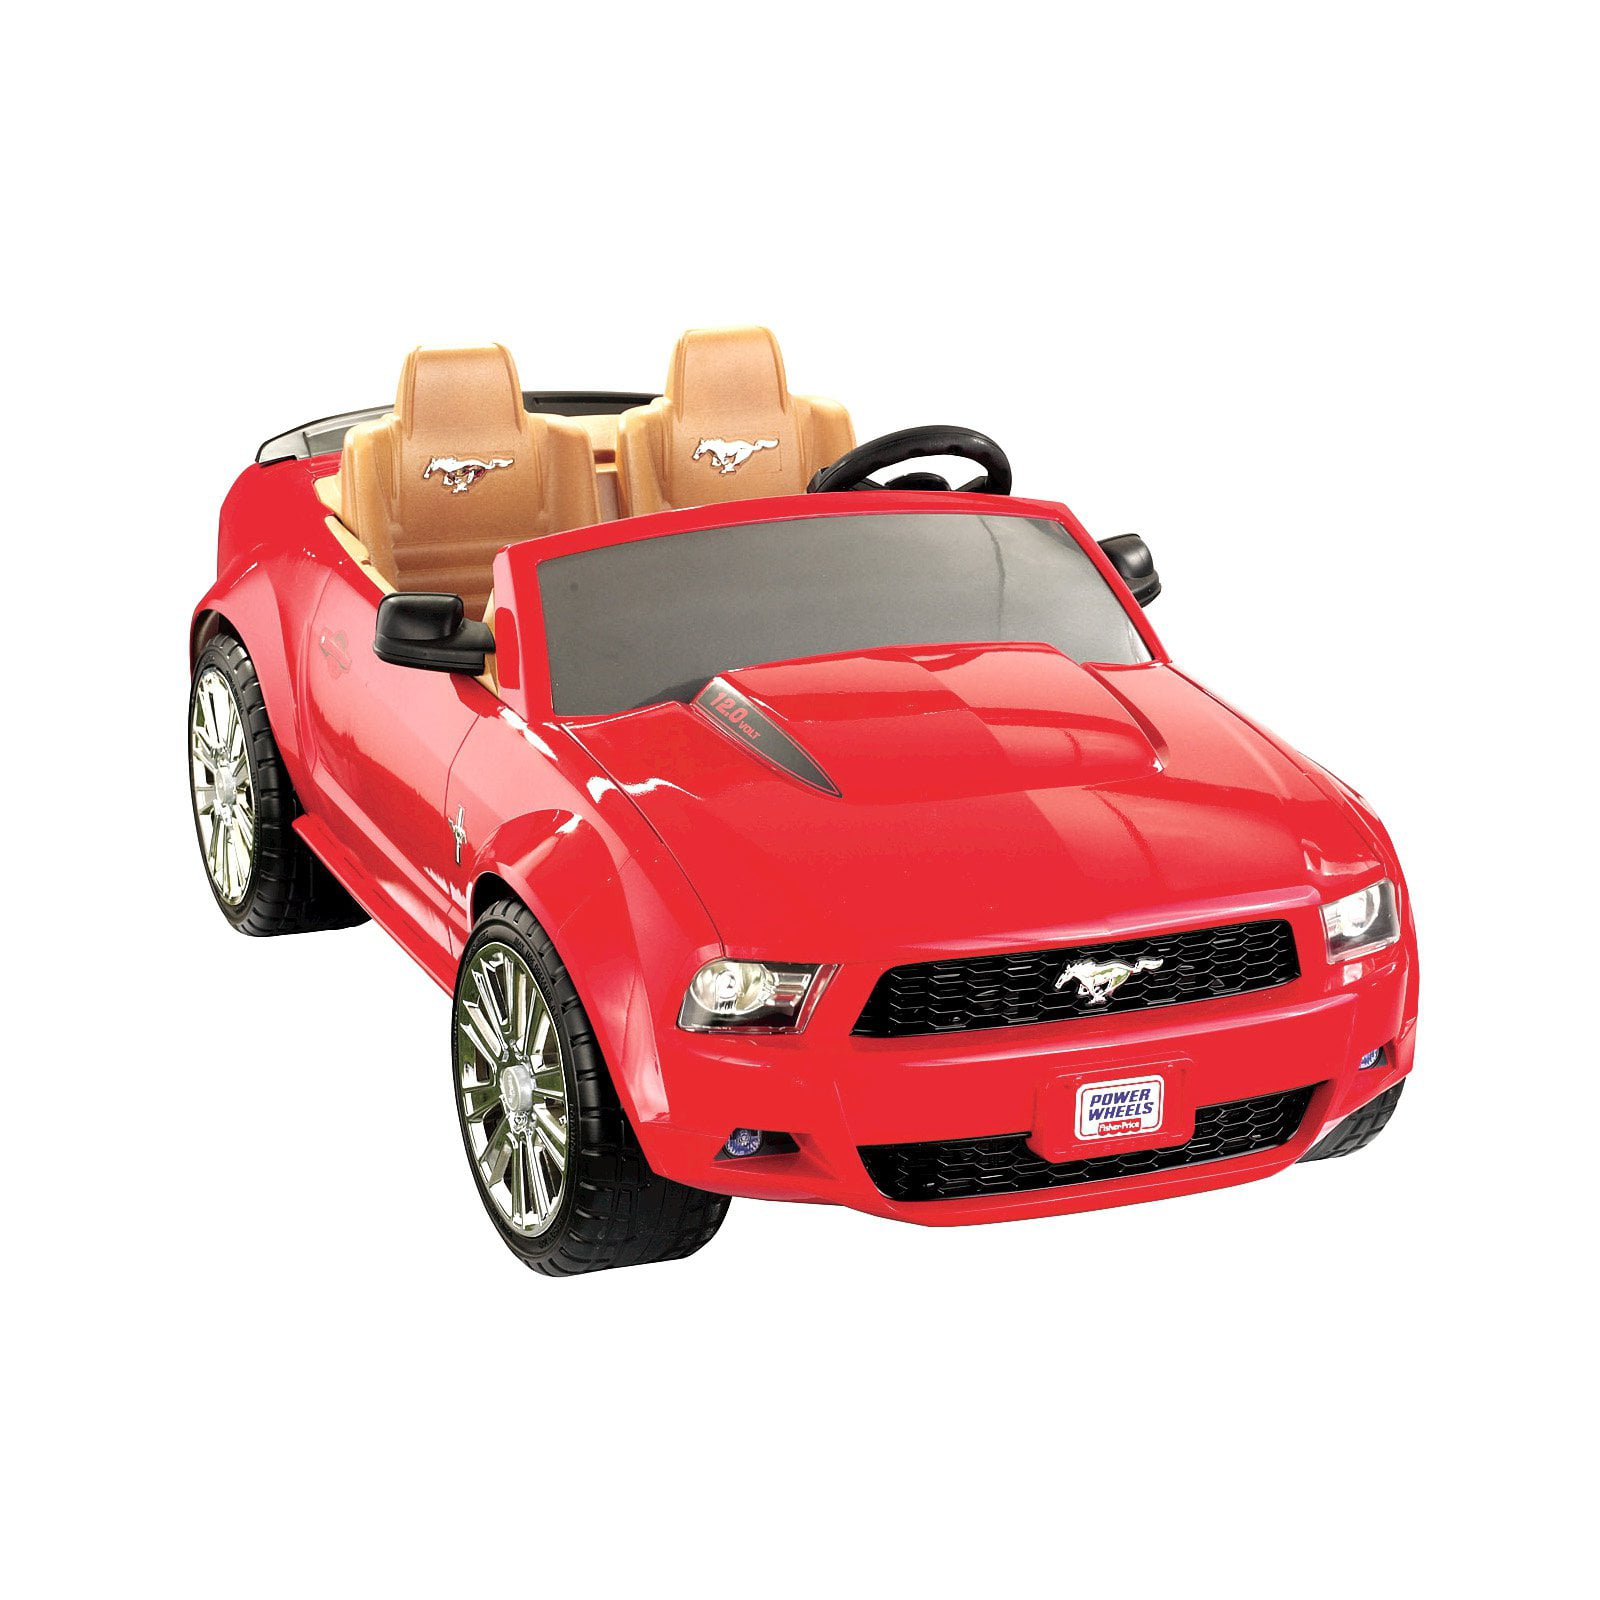 Fisher-Price Power Wheels Ford Mustang 